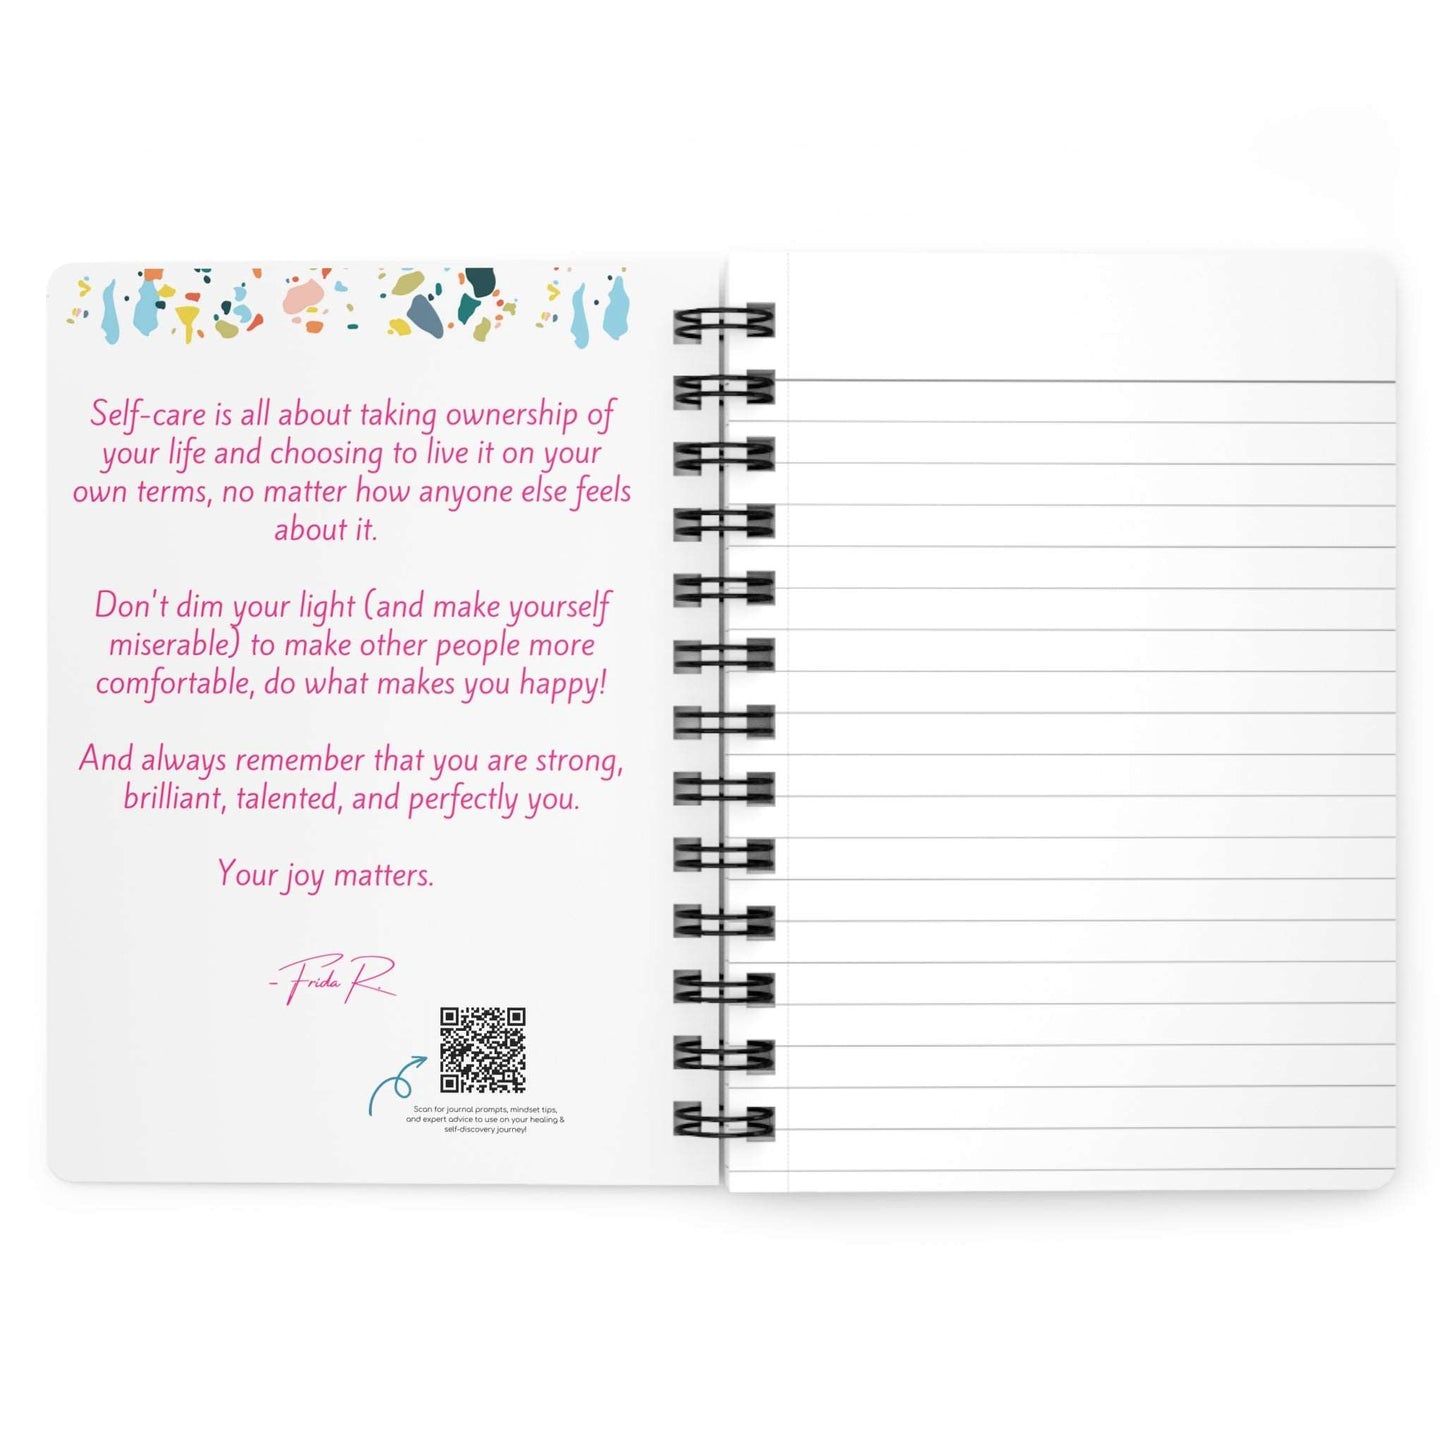 A Gratitude Affirmation Journal with positive affirmations for a self-care practice.